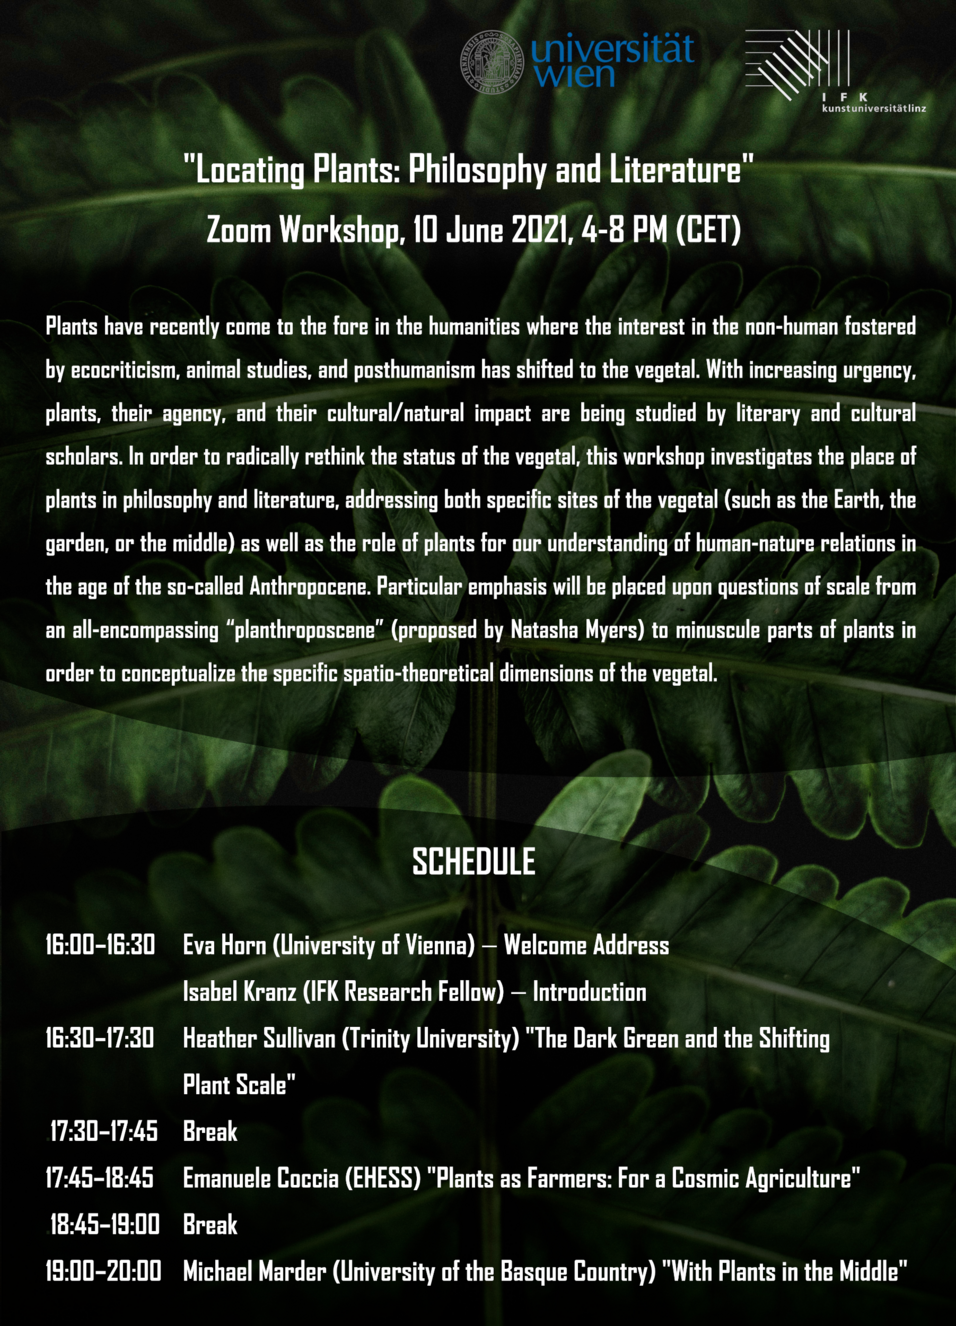 Programme of the 'Locating Plants' workshop, June 2021, white text on dark green background (close-up photograph of farn leaves)